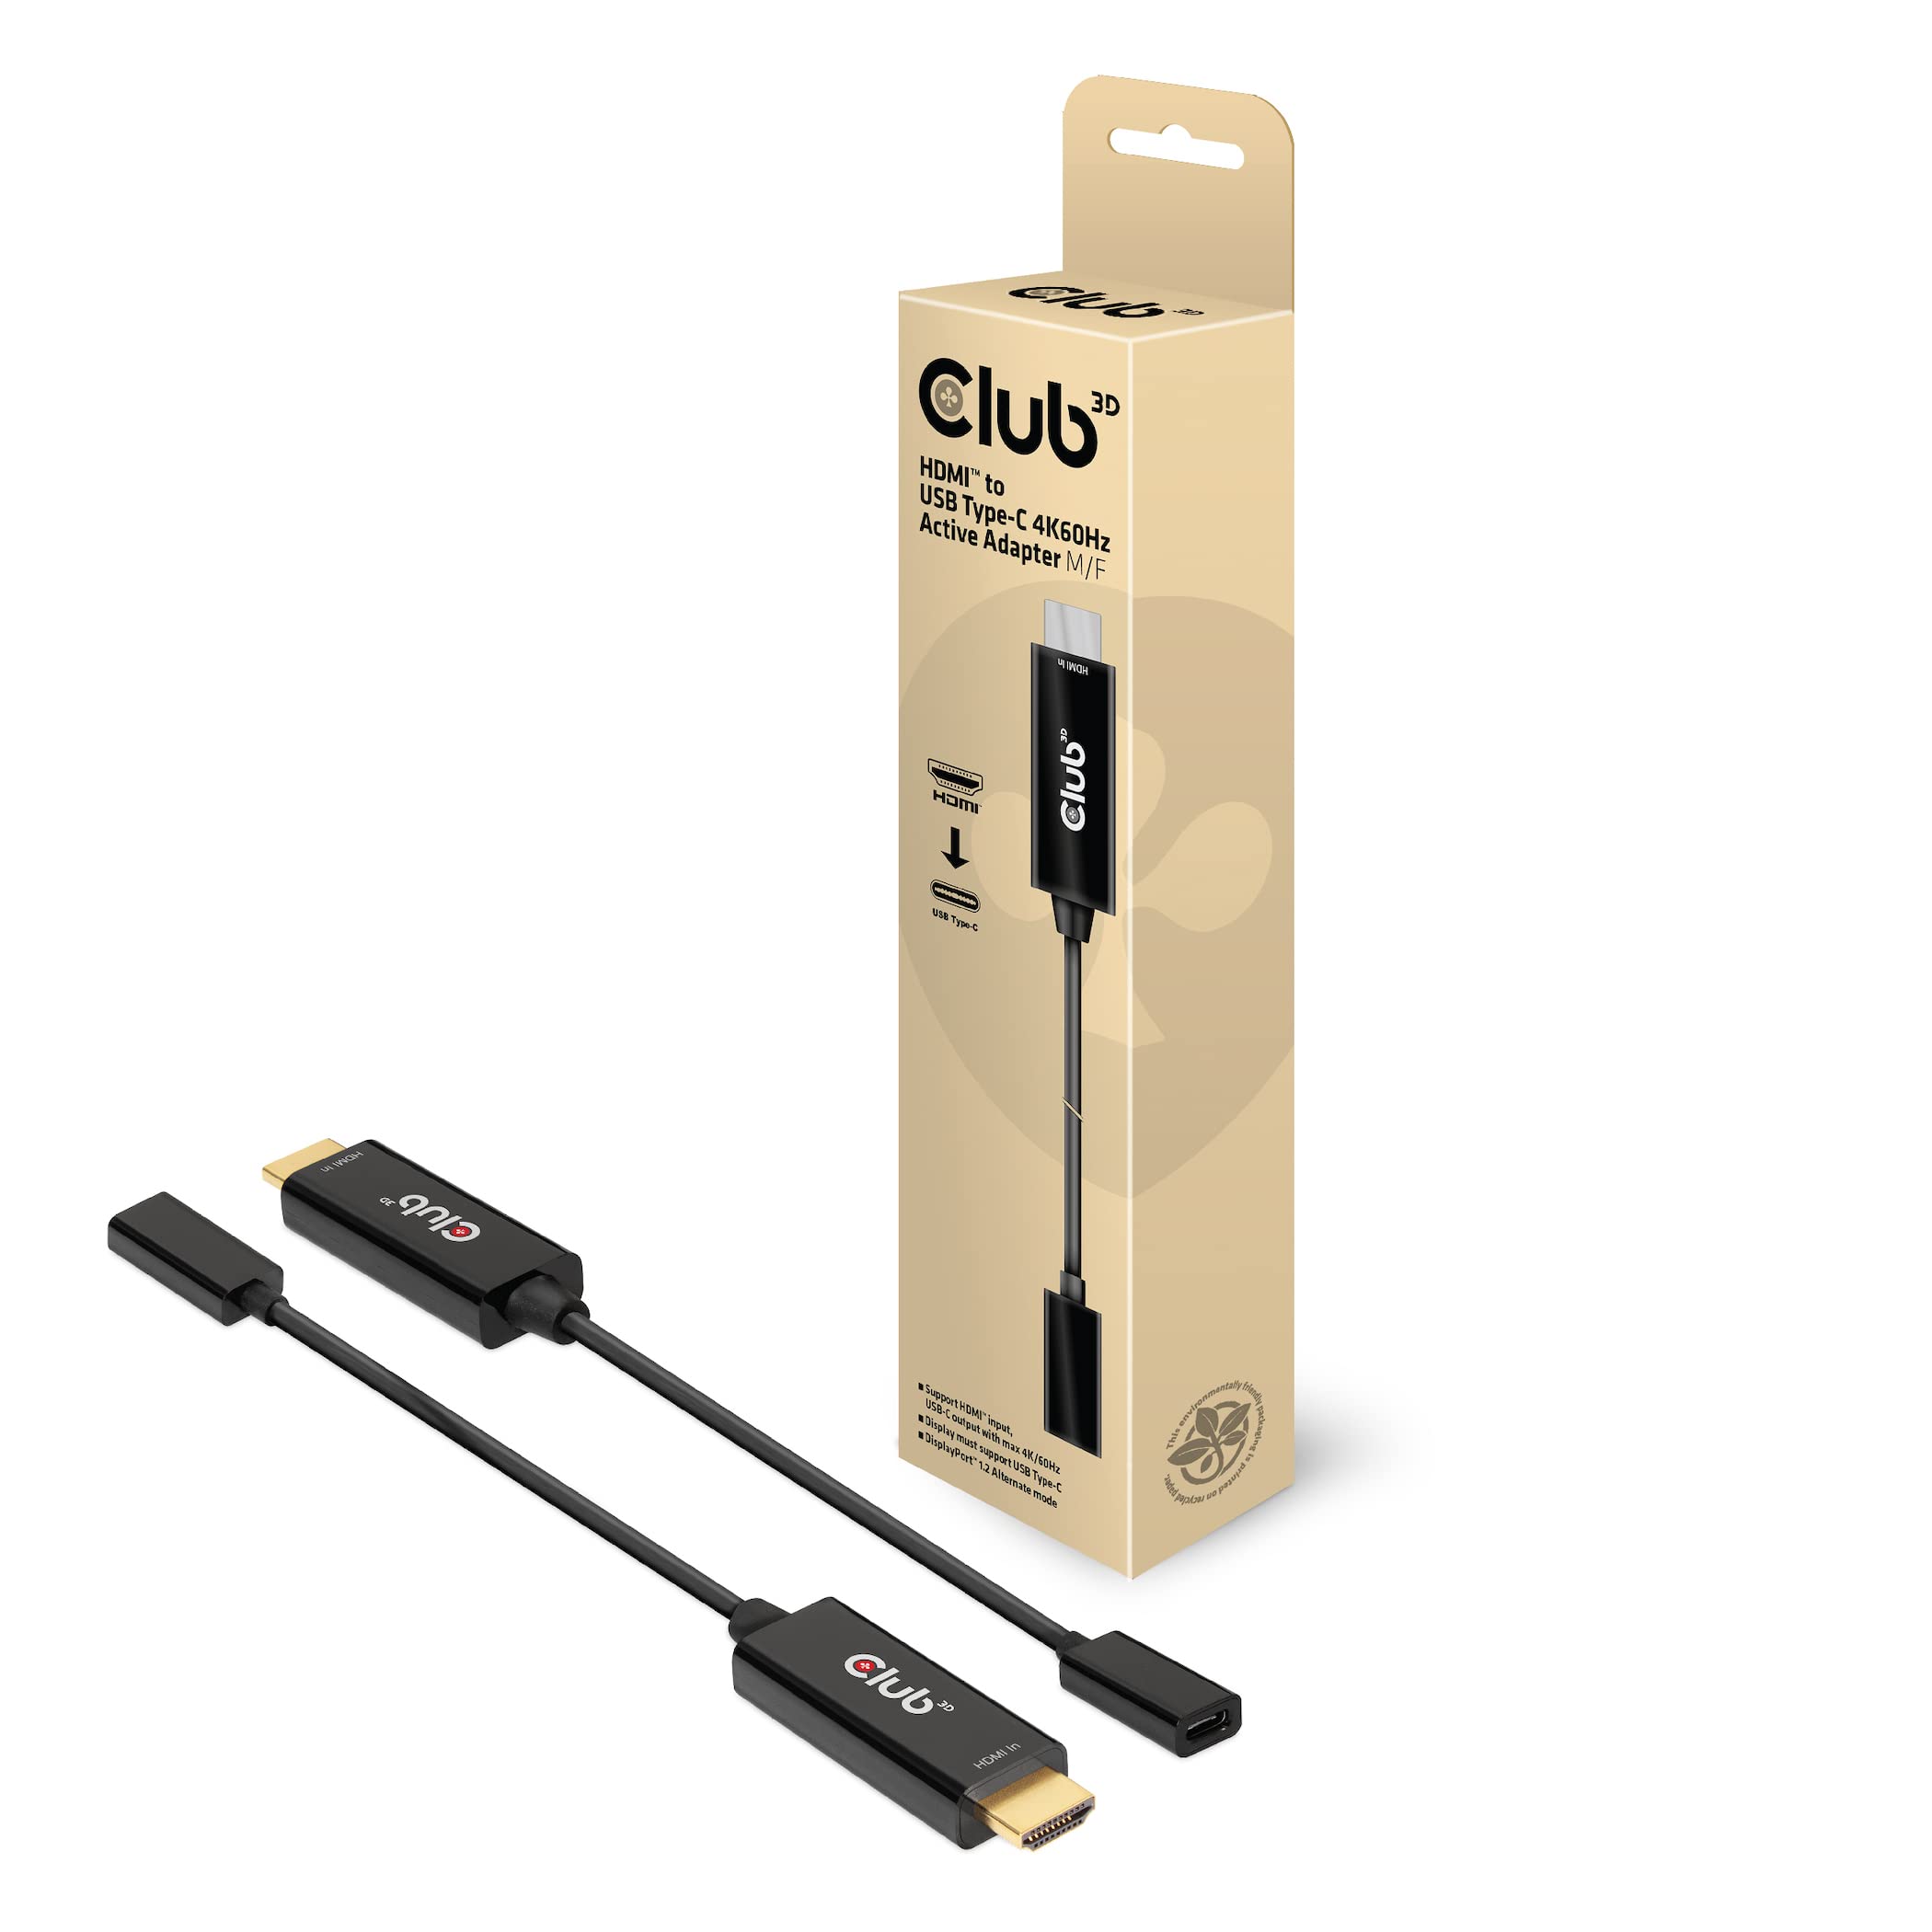 Club 3D HDMI Male オス to USB Type C Female メス アクティブ アダプタ 4K@60Hz (CAC-133